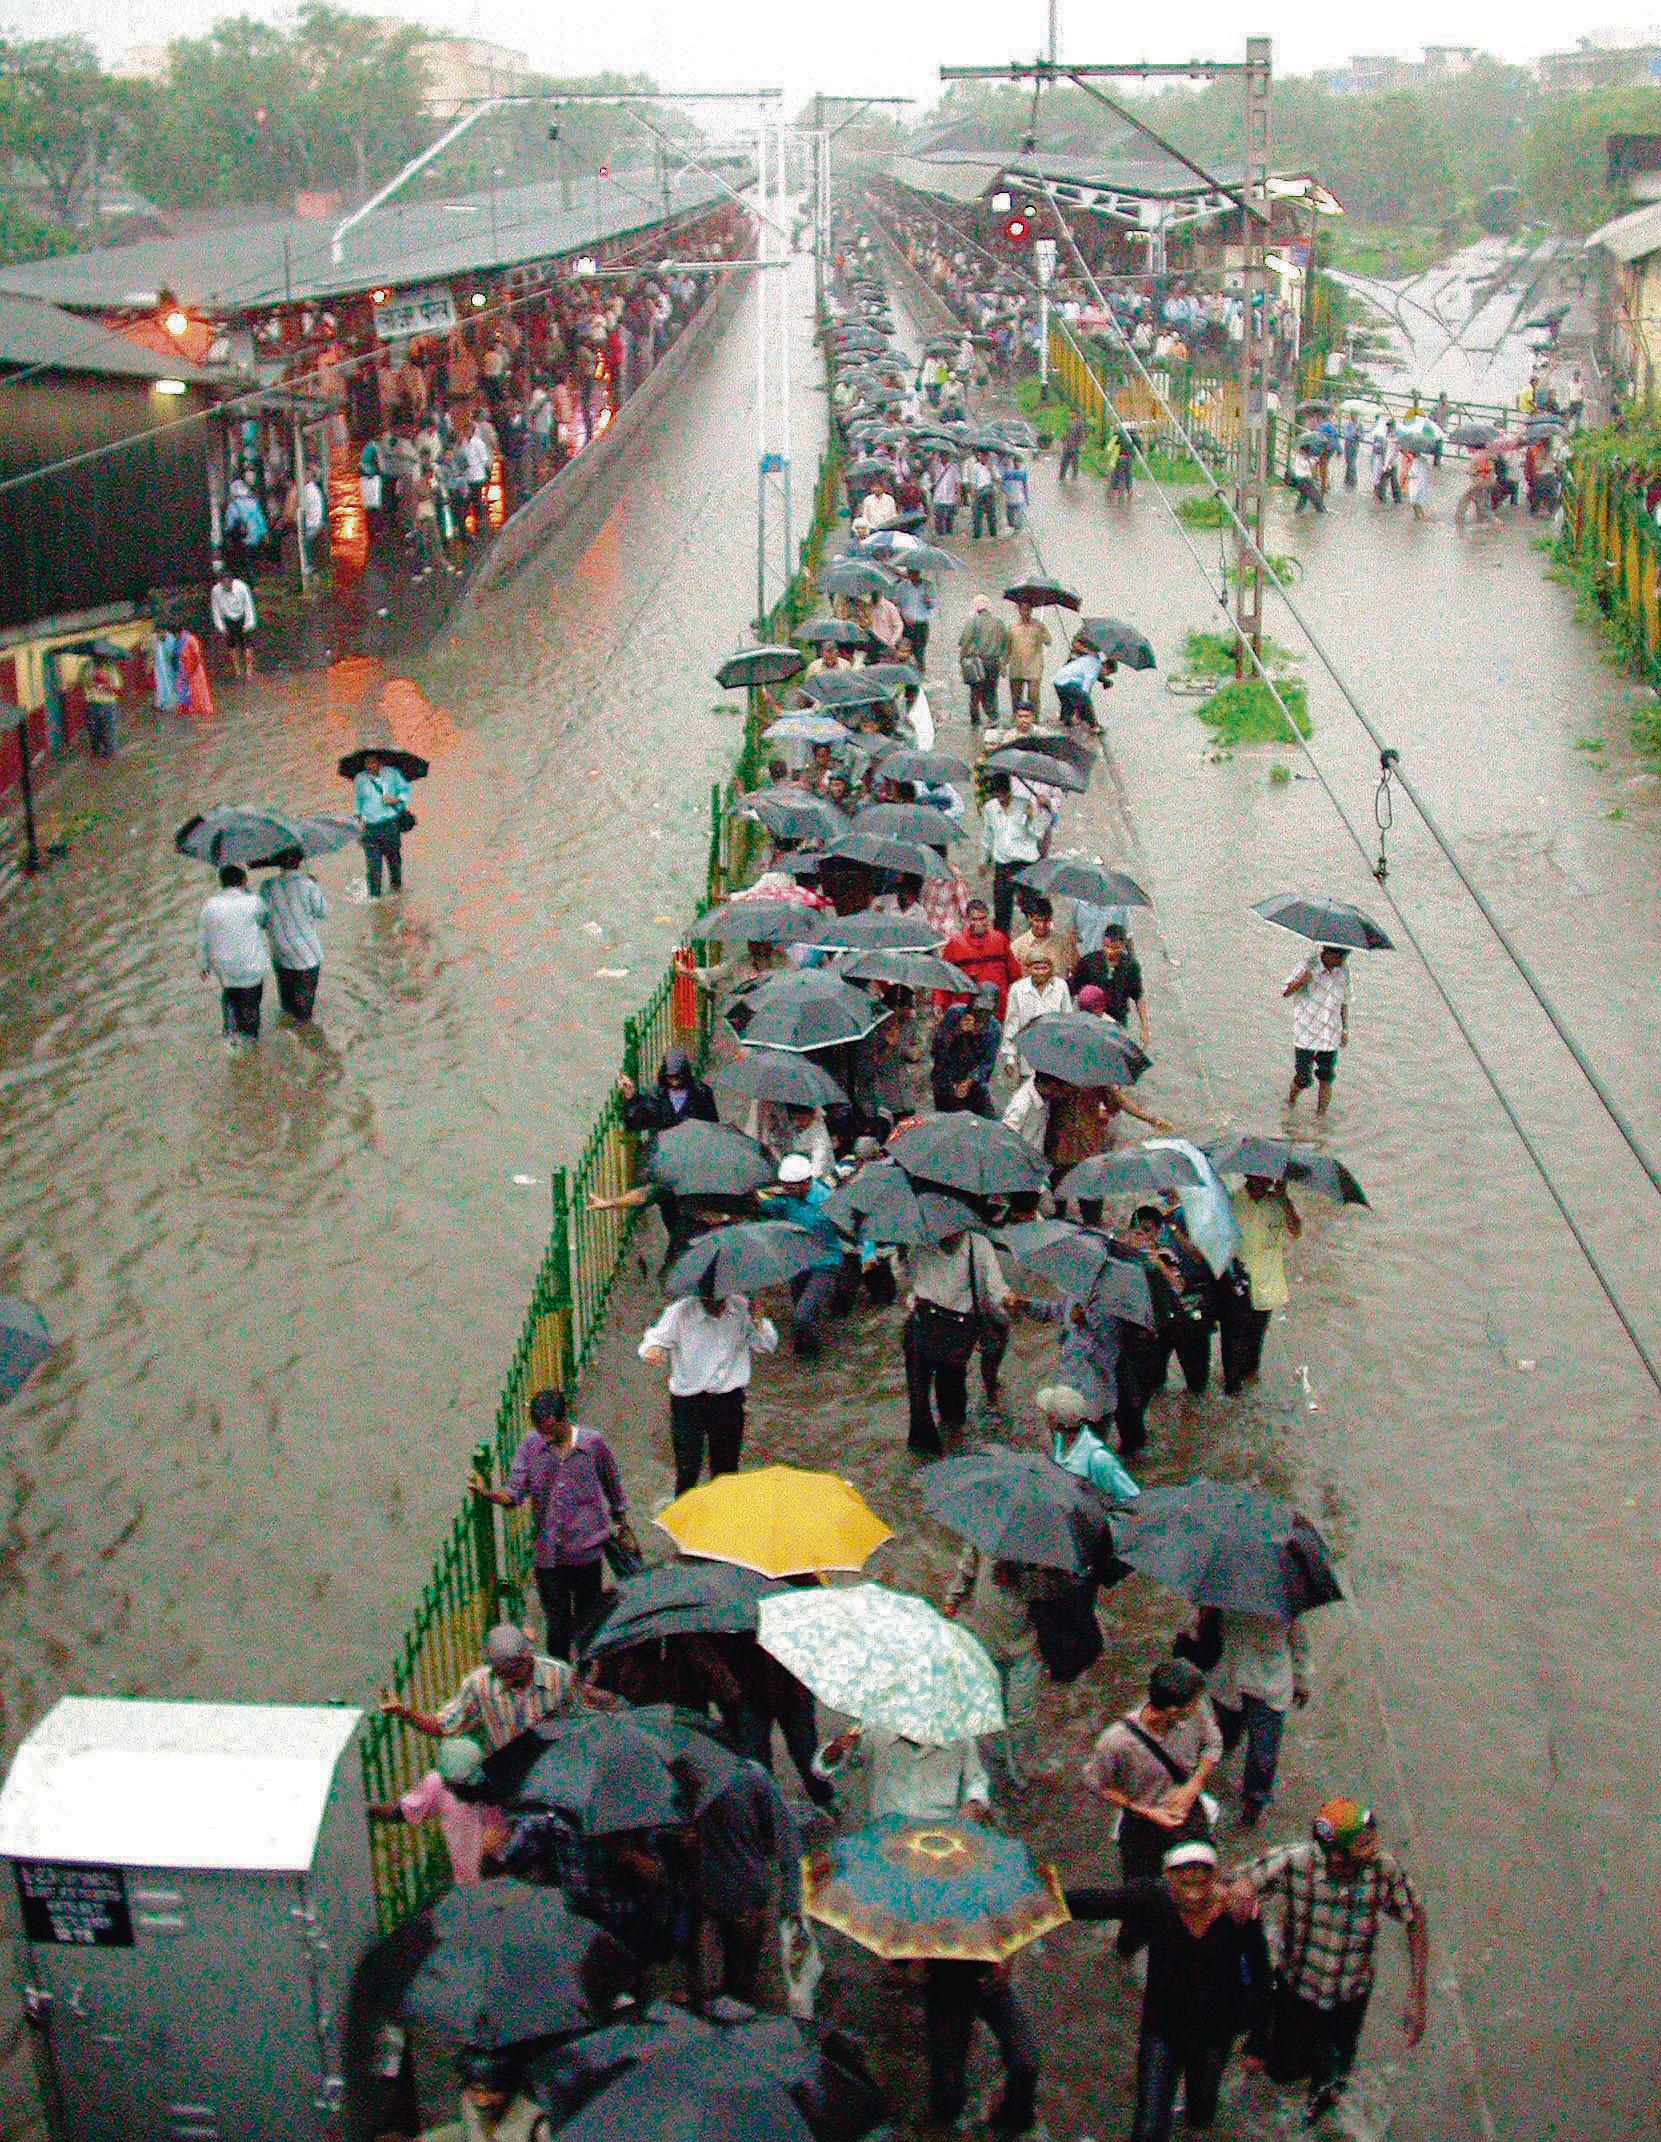 People walk on the waterlogged railway tracks during the July 26, 2005 floods.